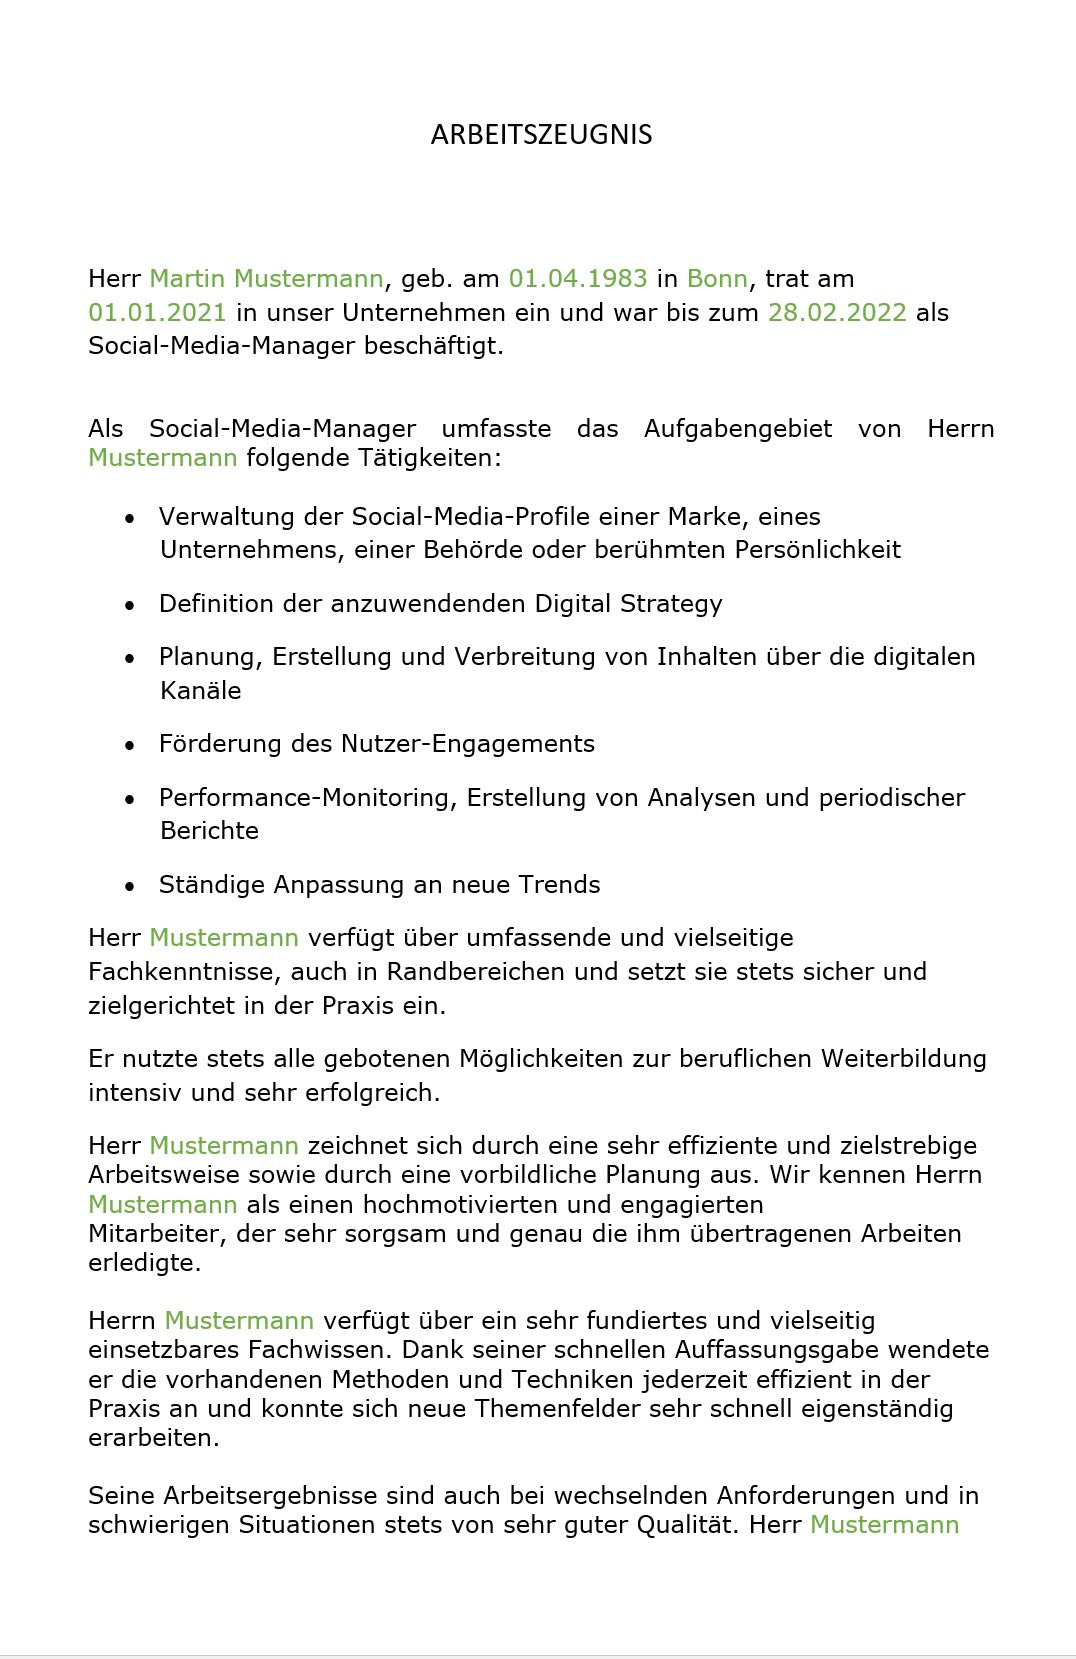 Arbeitszeugnis Social Media Manager Vorlage m/w/d - Simply Download